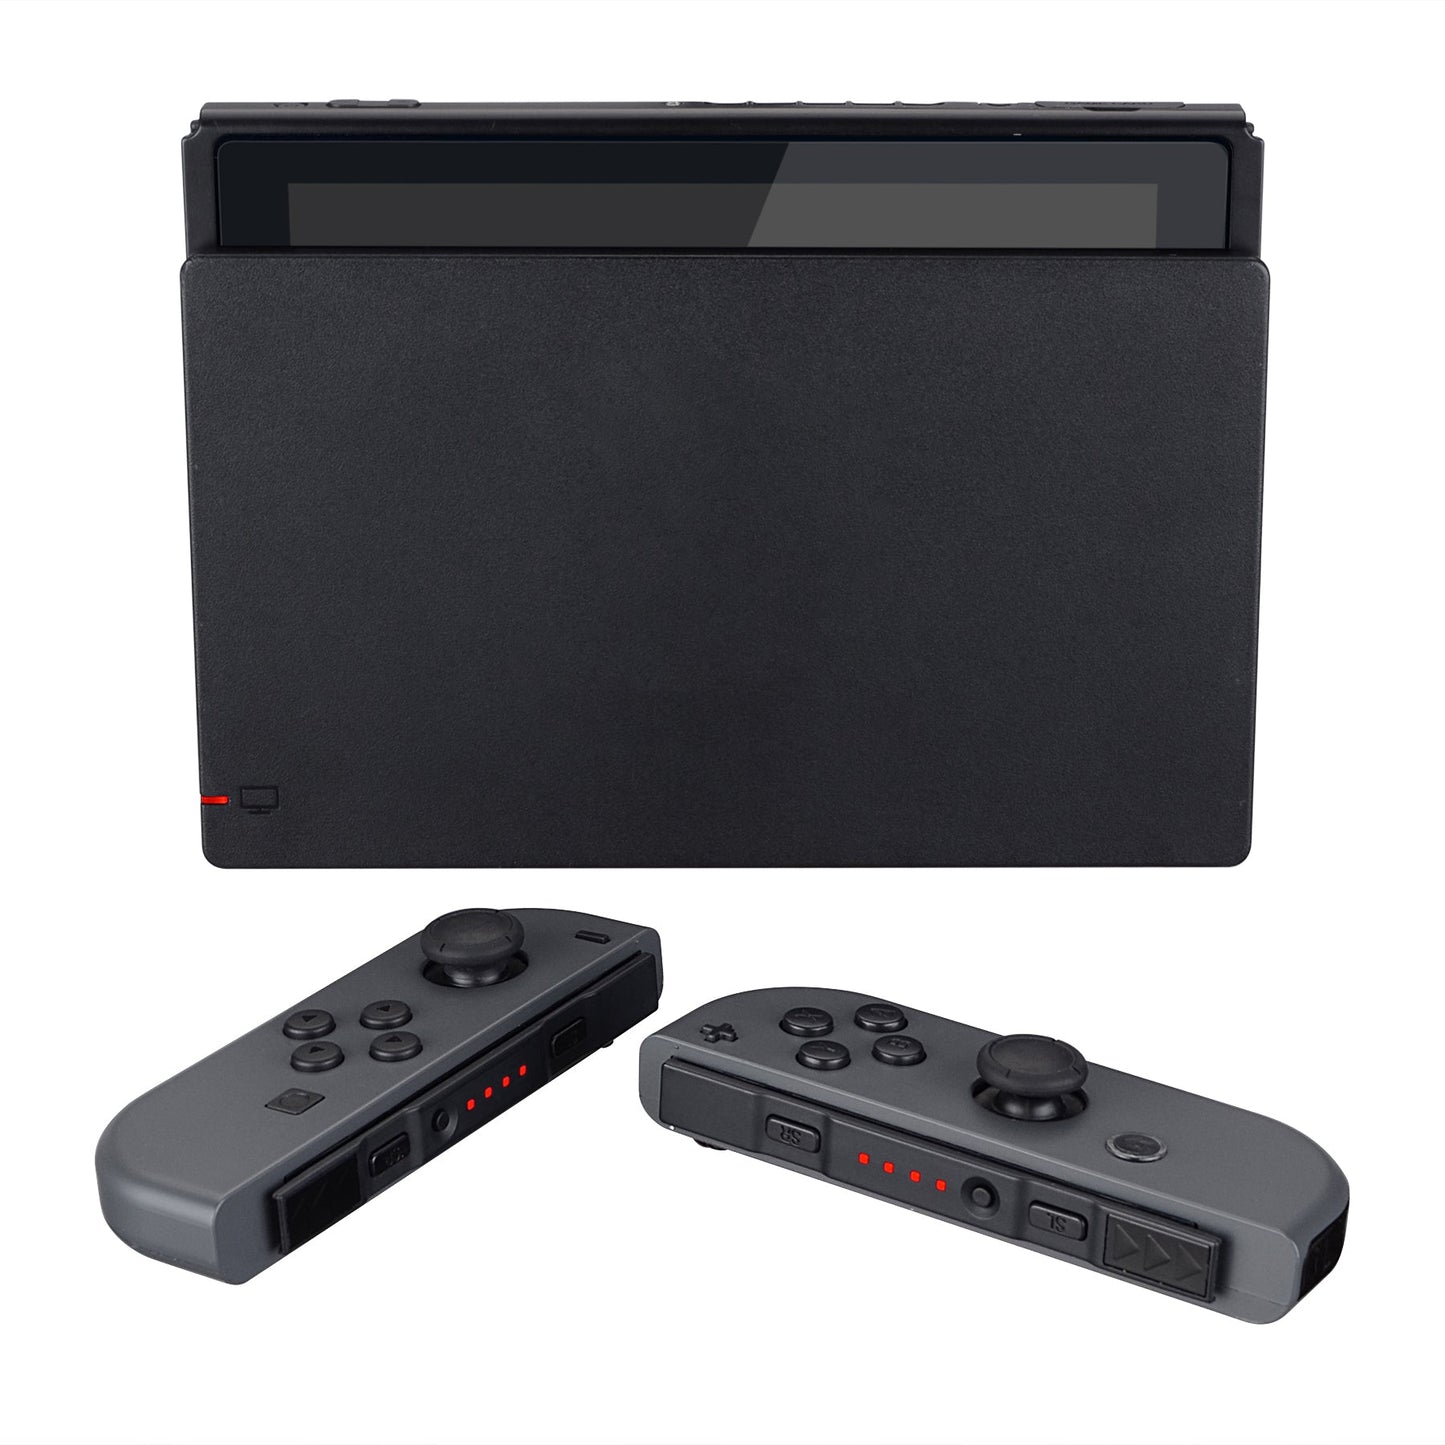 eXtremeRate Retail Red Firefly LED Tuning Kit for NS Switch Joycons Dock NS Joycon SL SR Buttons Ribbon Flex Cable Indicate Power LED-Joycons Dock NOT Included - NSLED003